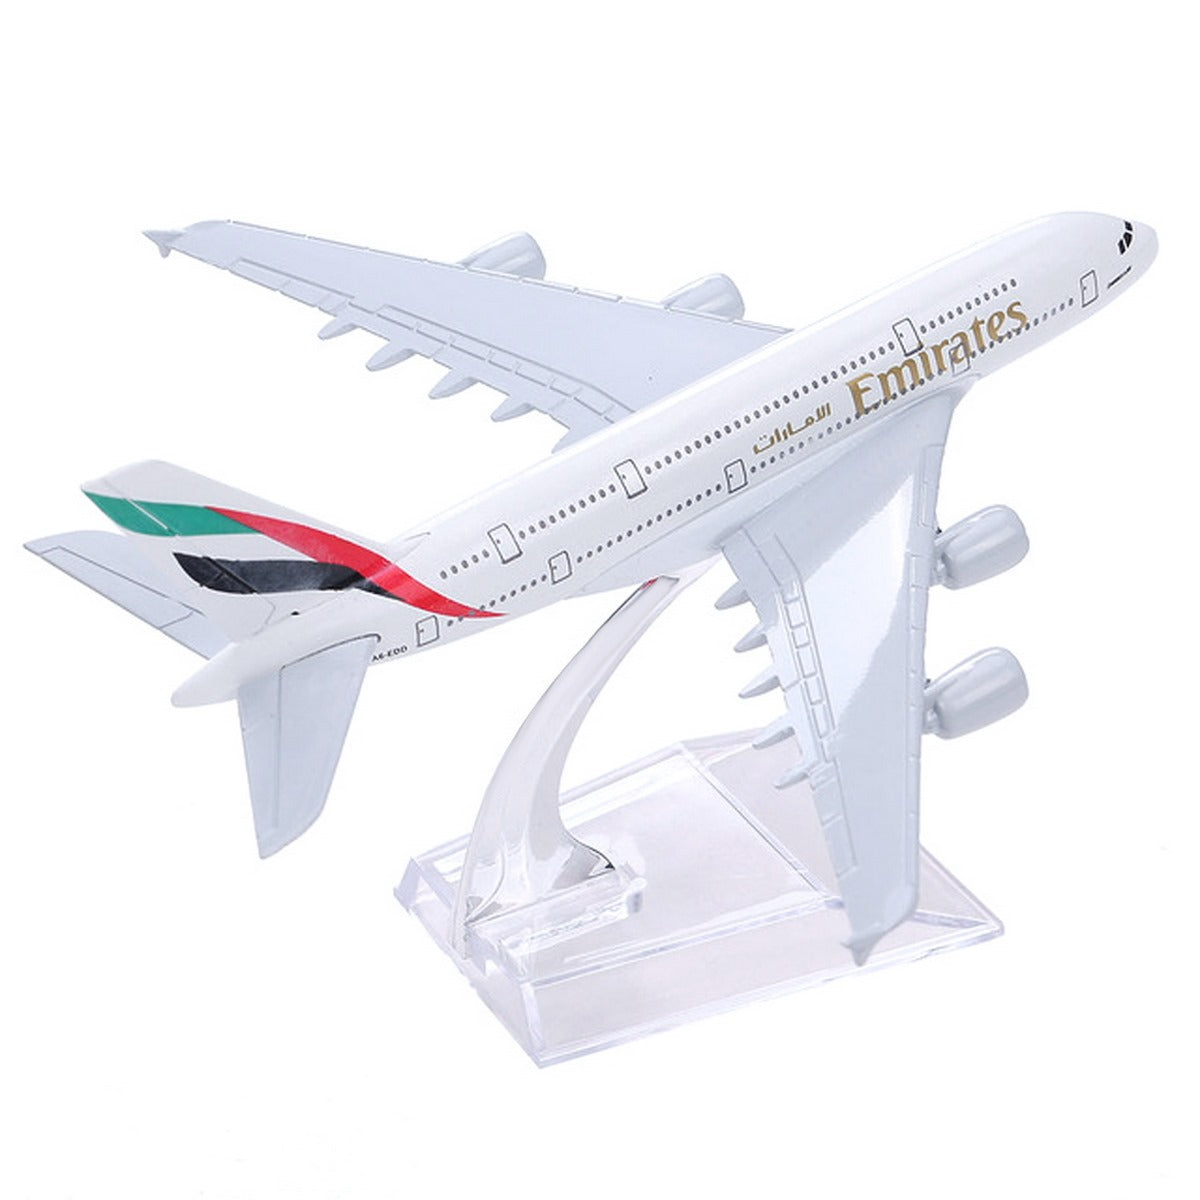 Aircraft Model Small Emirates - For Office Use, Personal Use, or Corporate Gifting